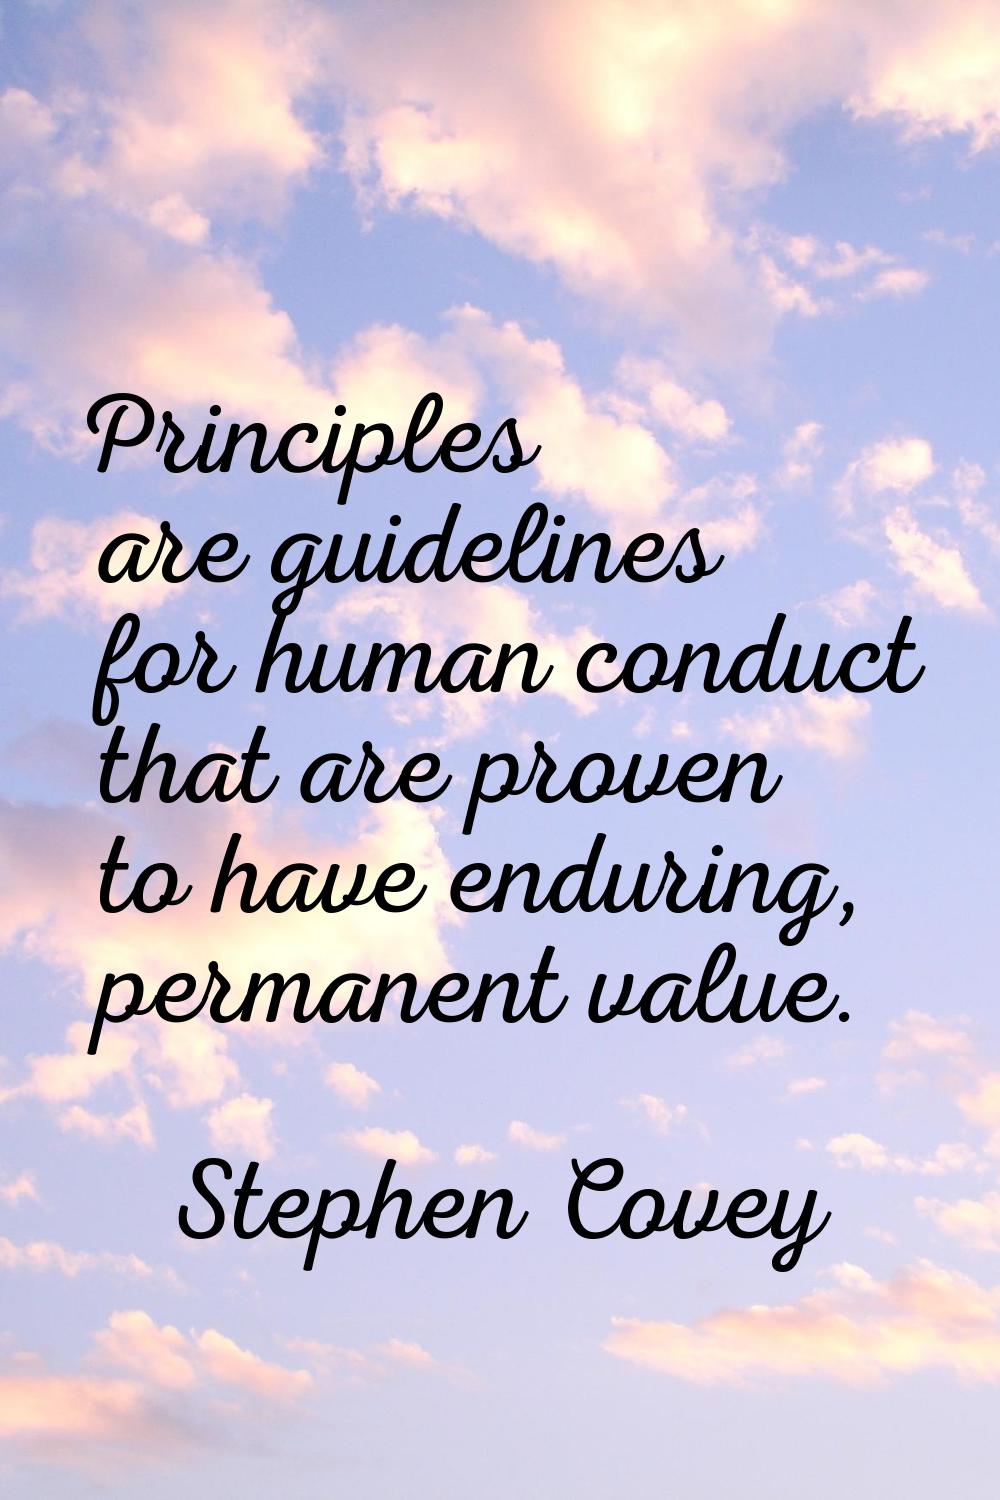 Principles are guidelines for human conduct that are proven to have enduring, permanent value.